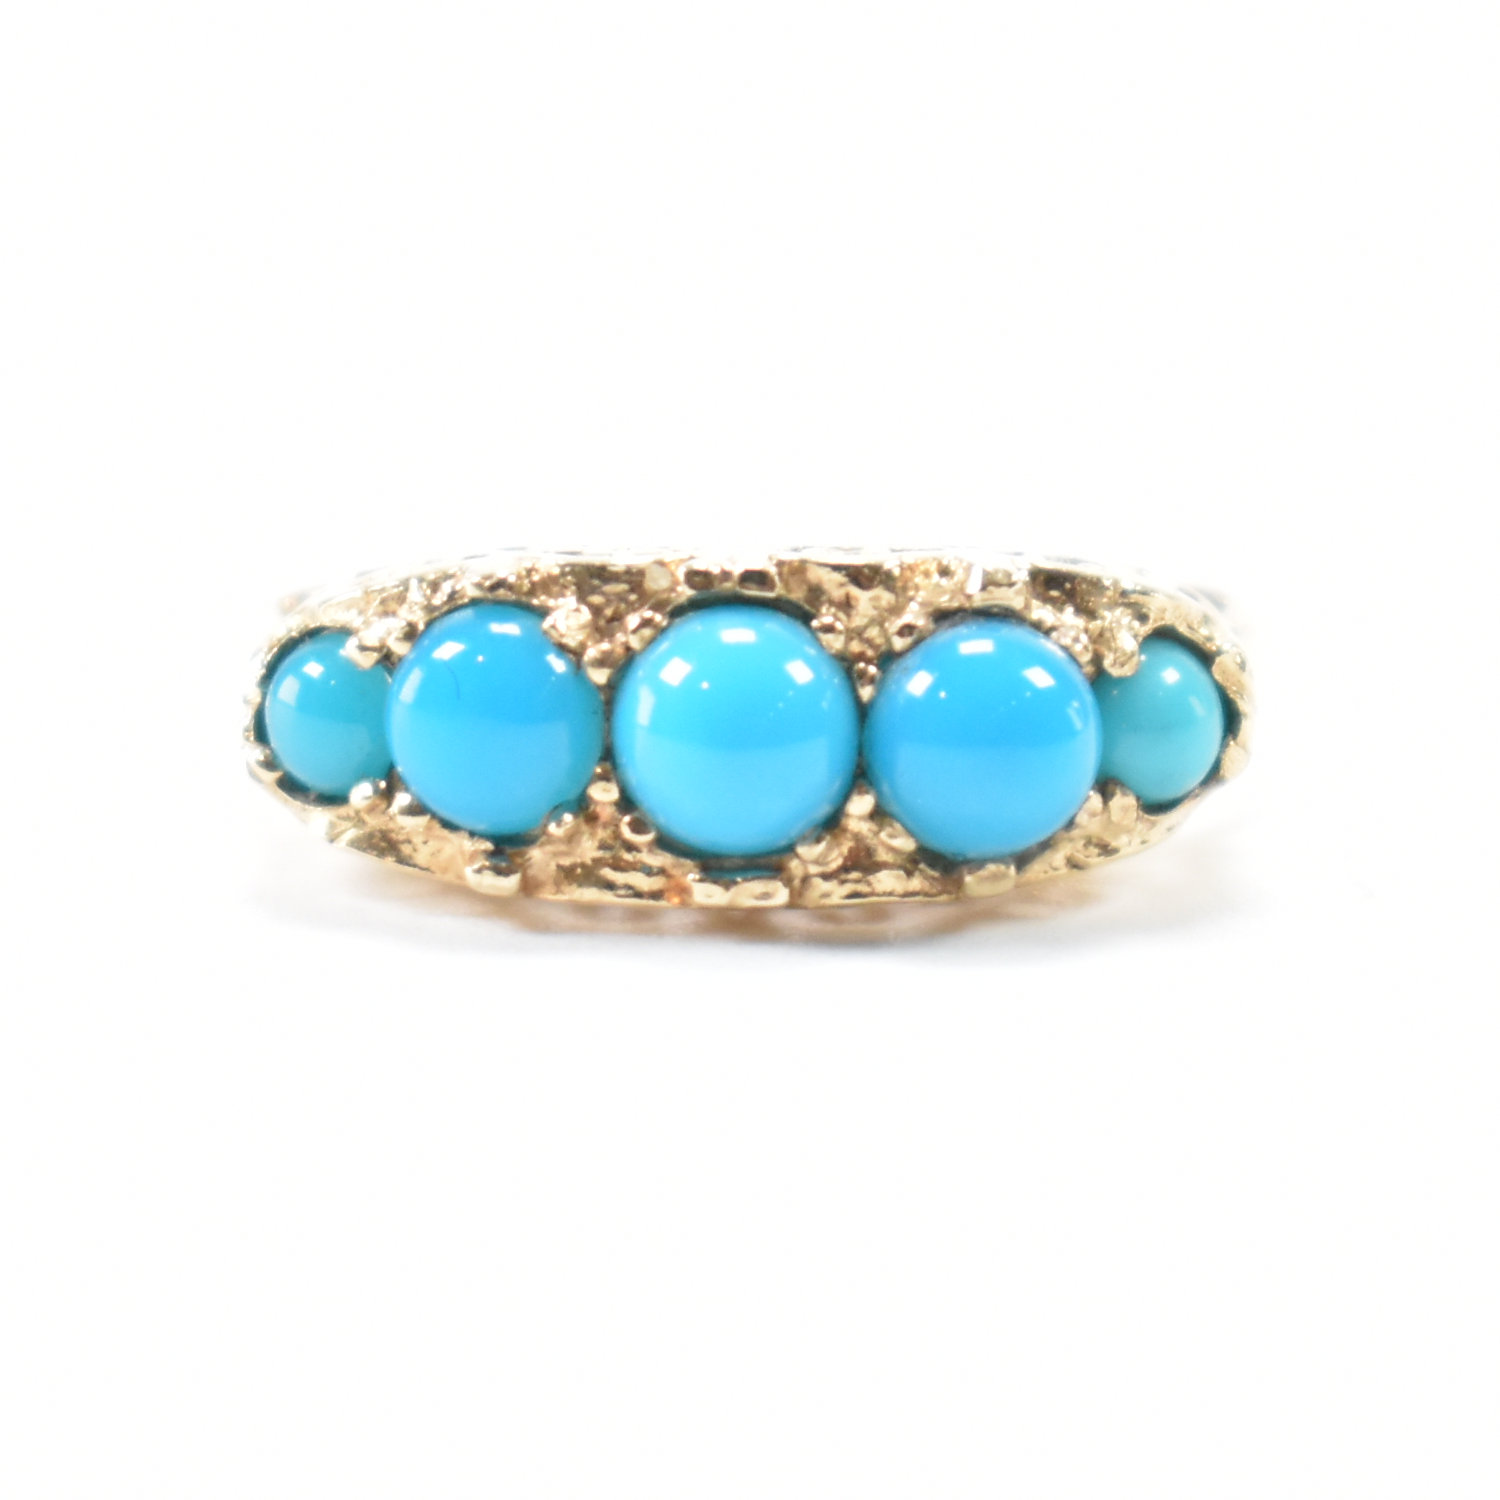 HALLMARKED 9CT GOLD 5 STONE TURQUOISE RING